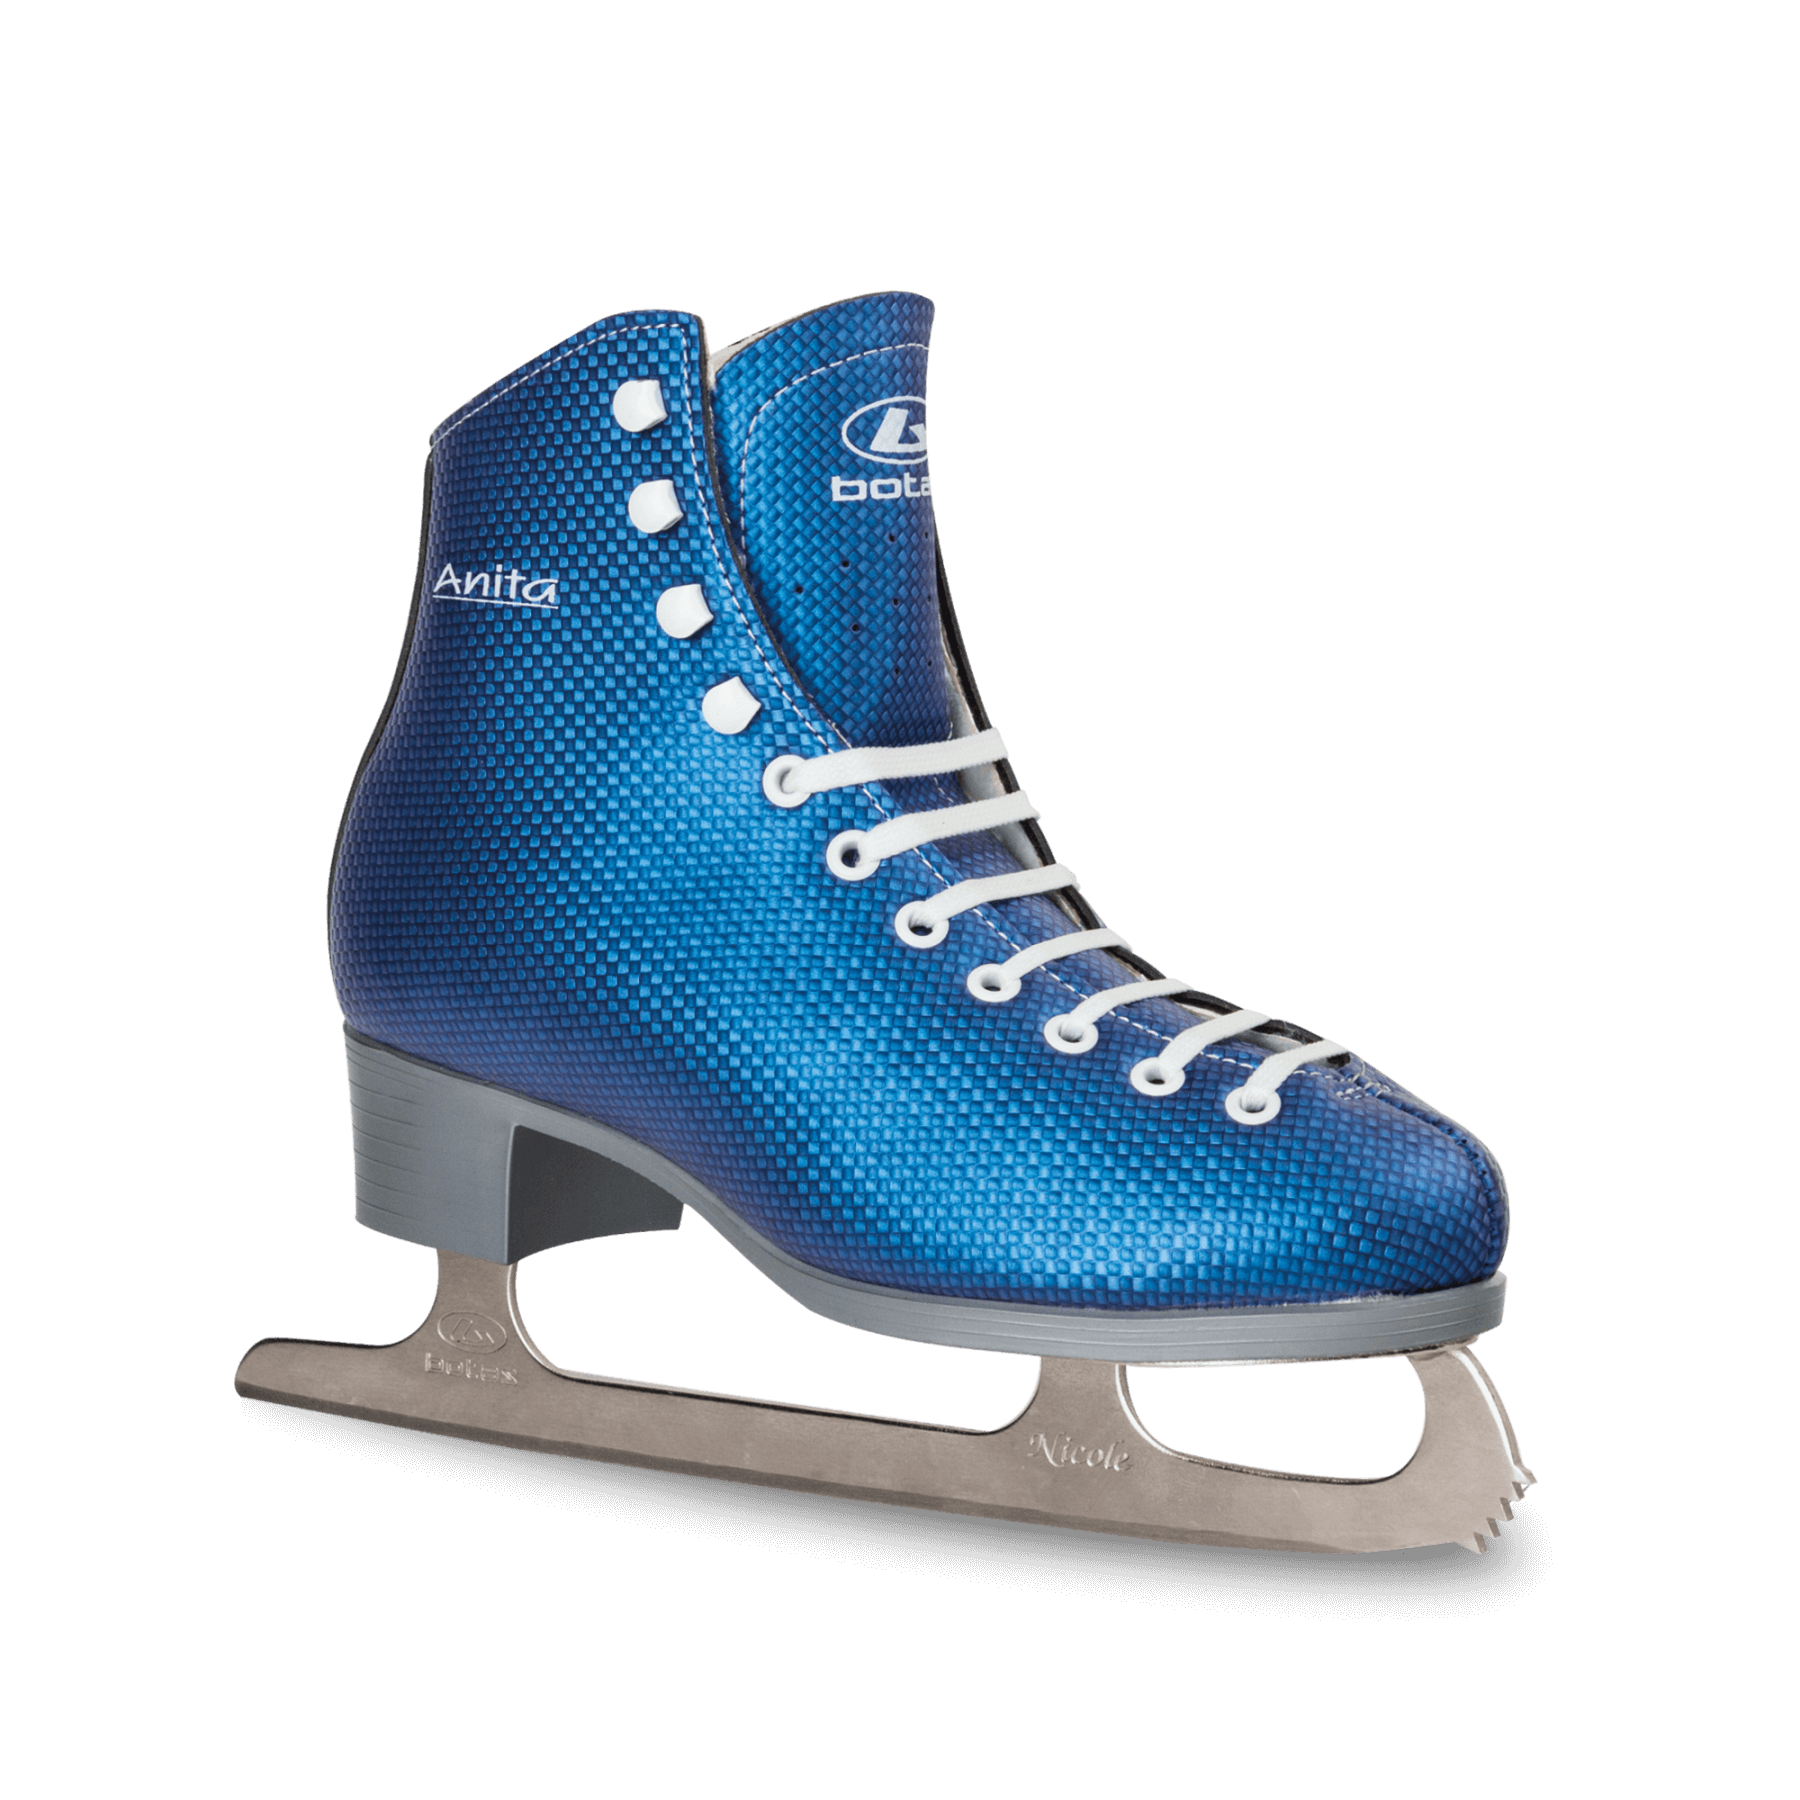 Ice Skate PNG Background Image